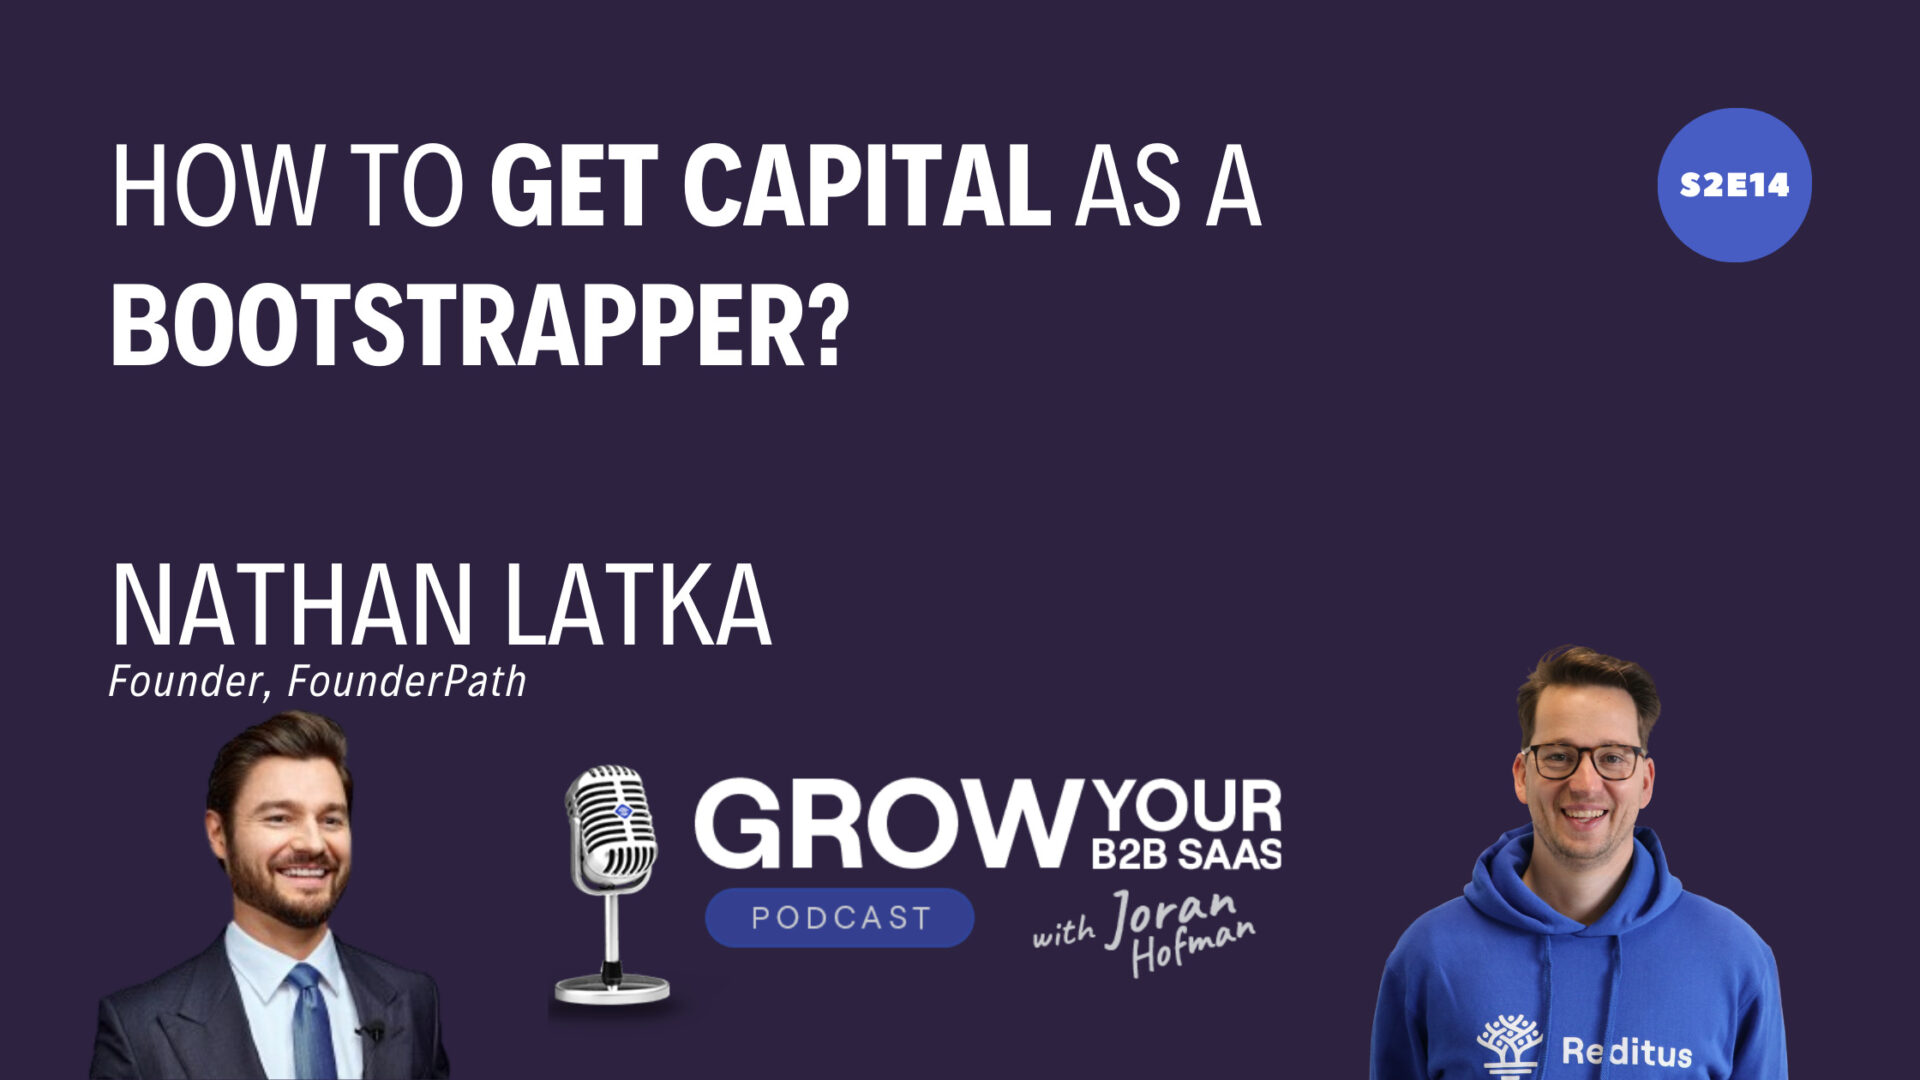 S2E14 – How to get capital as a bootstrapper? With Nathan Latka